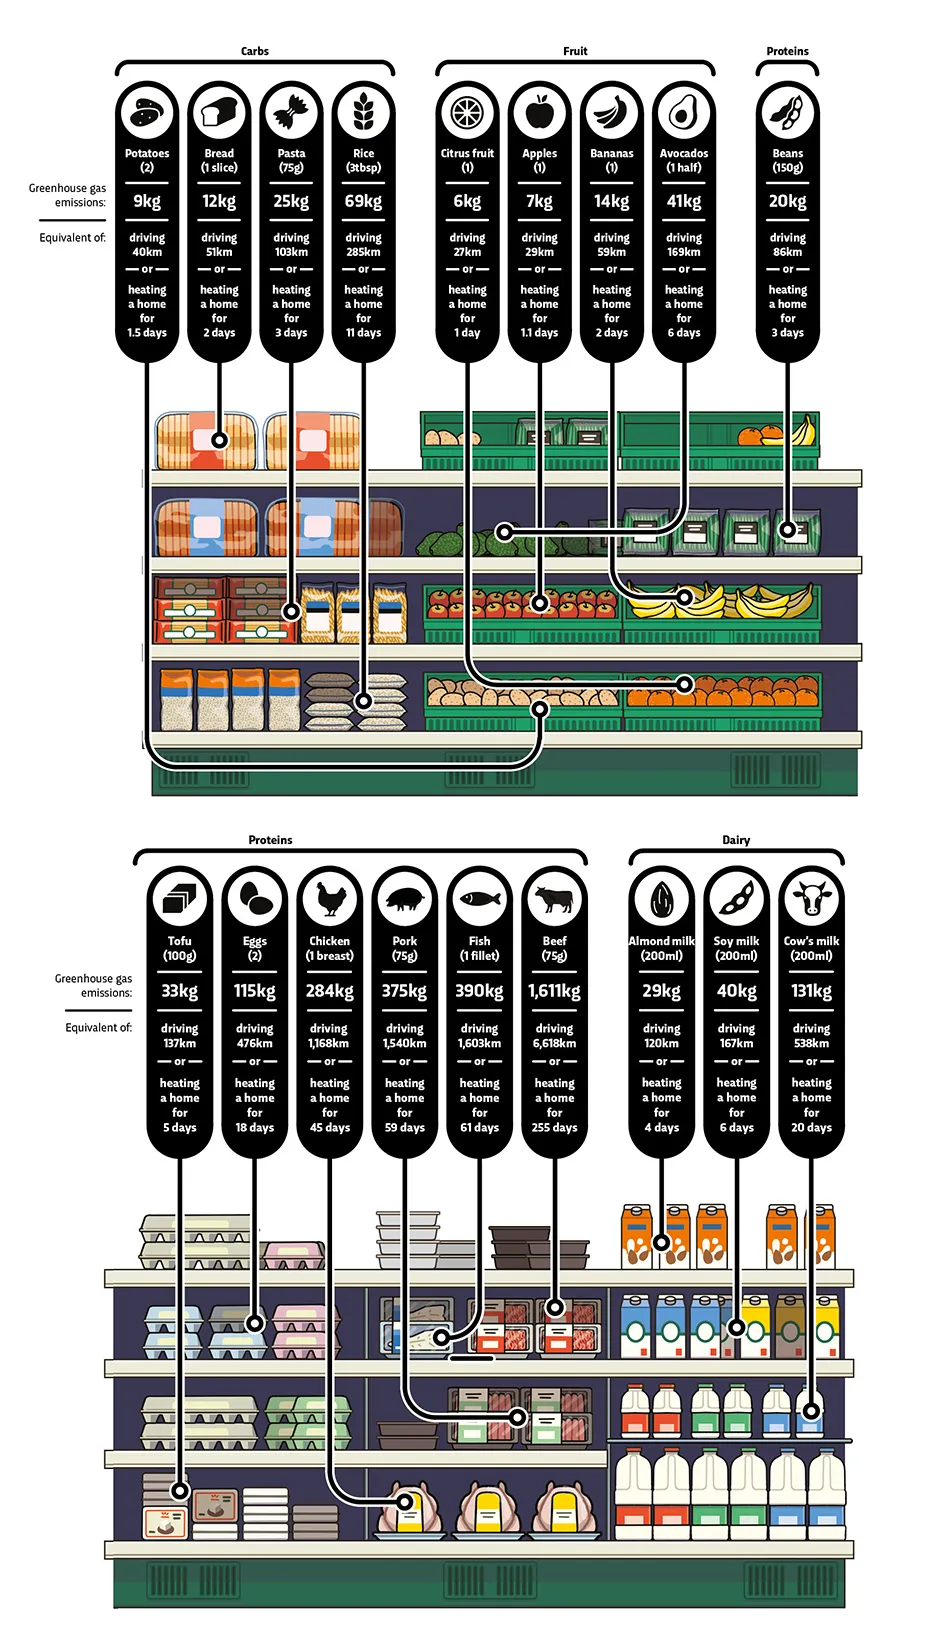 The greenhouse gas equivalents of different foods